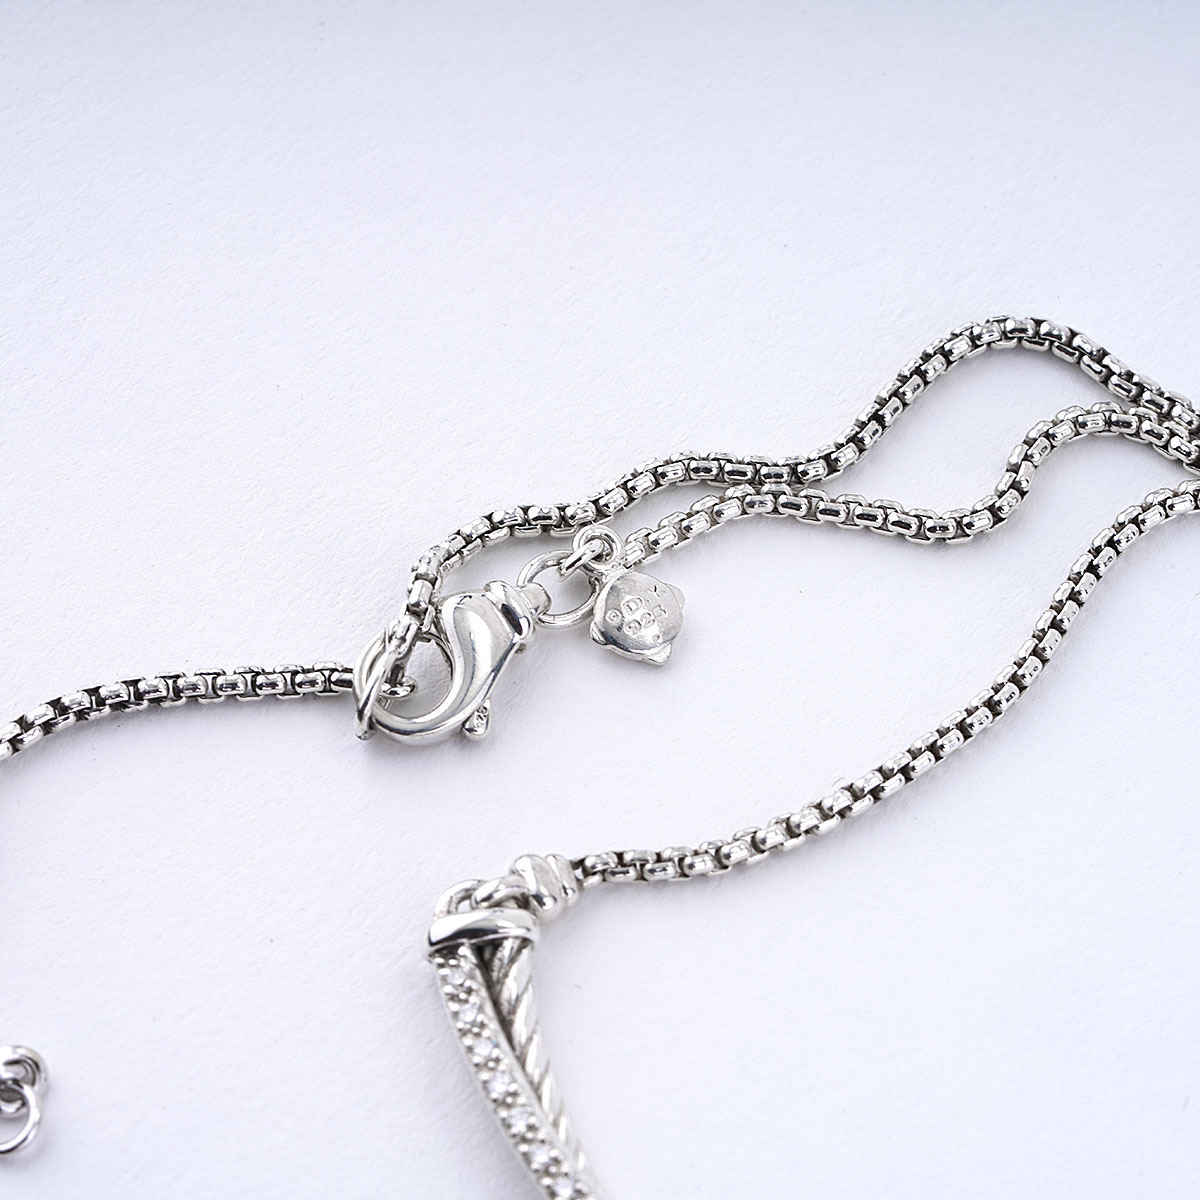 Crossover Pendant Necklace in Sterling Silver with Diamonds, 14.5mm | David  Yurman